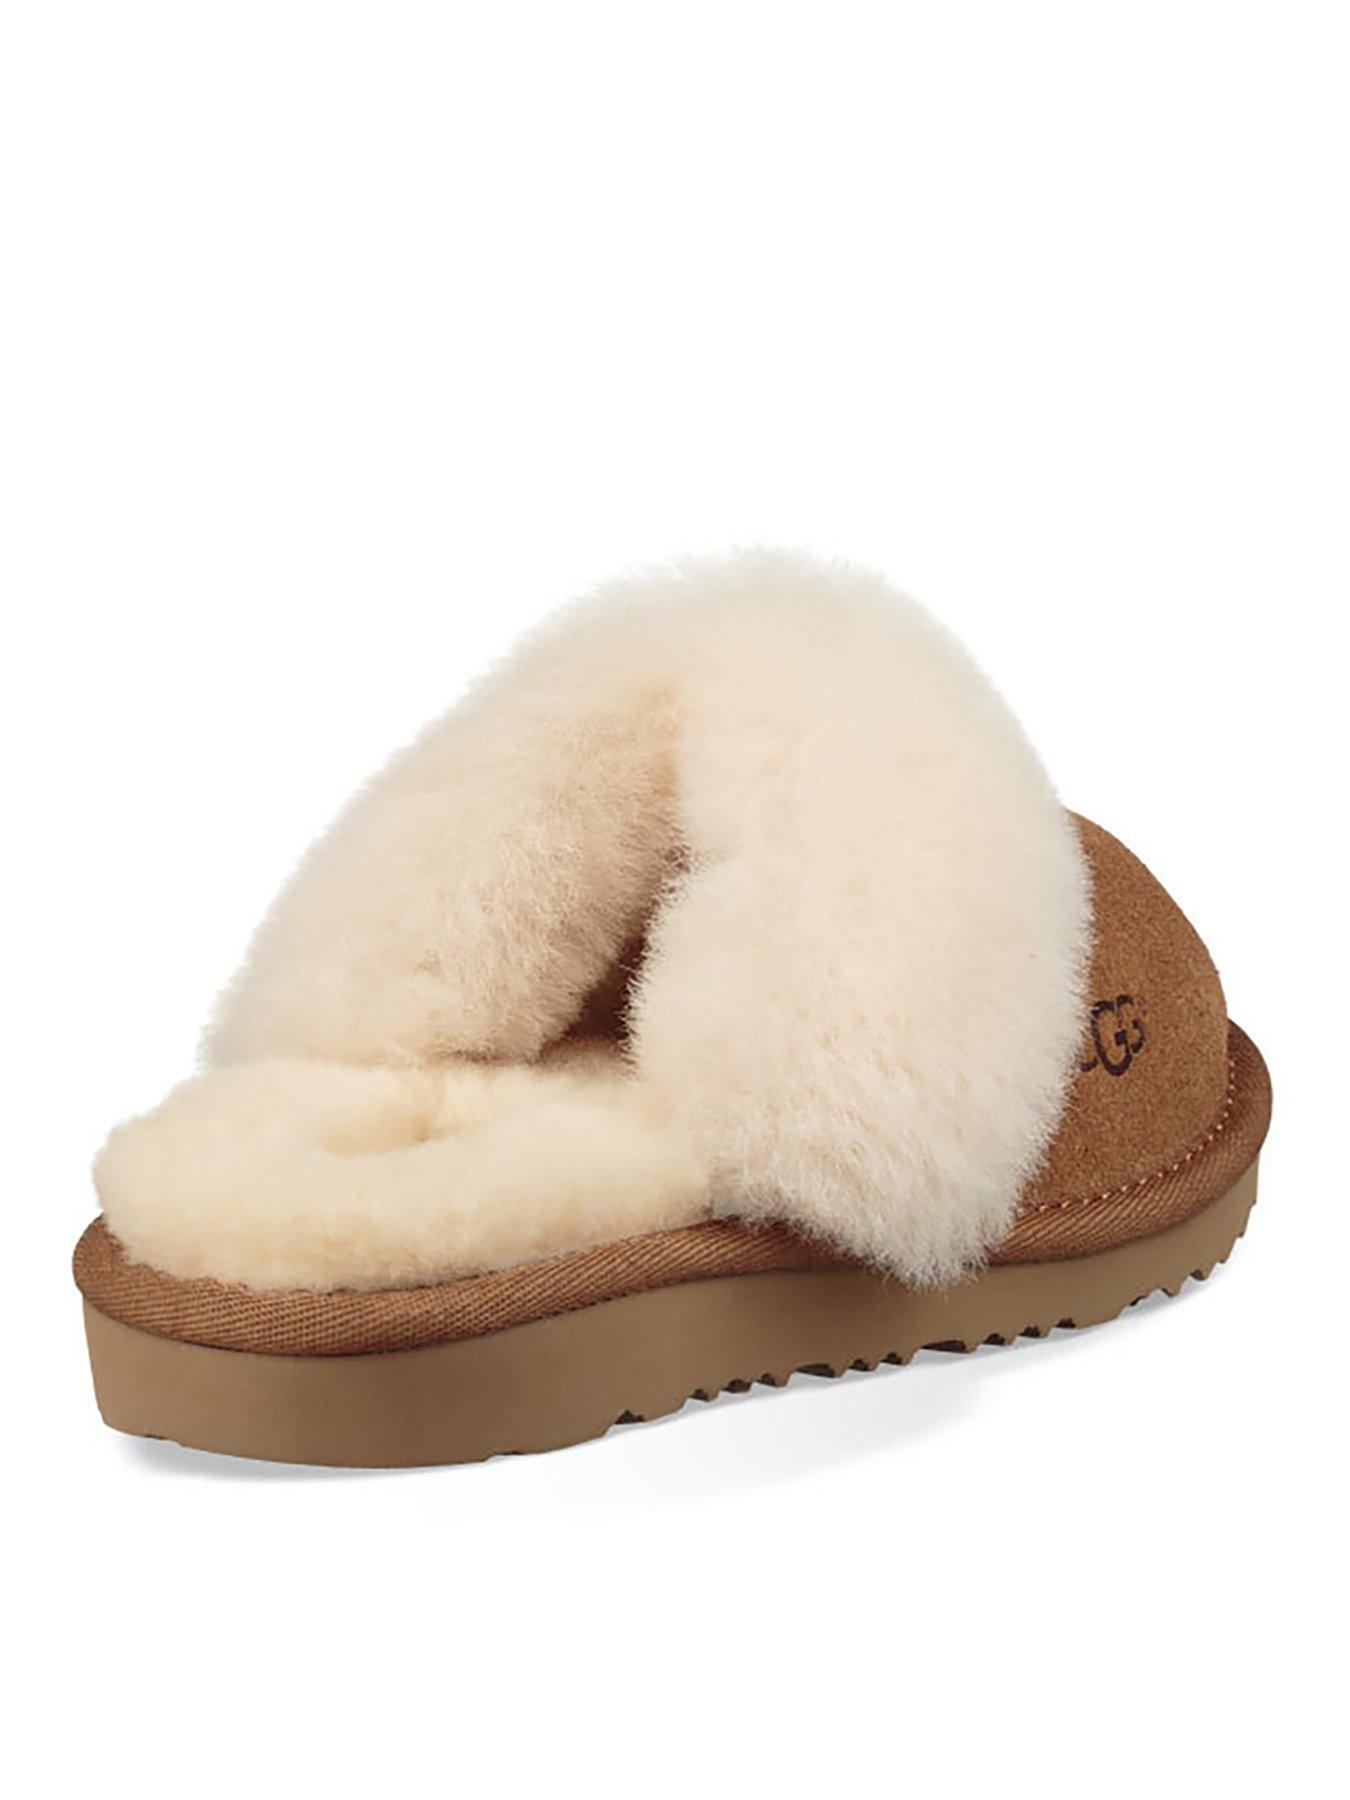 ugg cozy 2 slippers